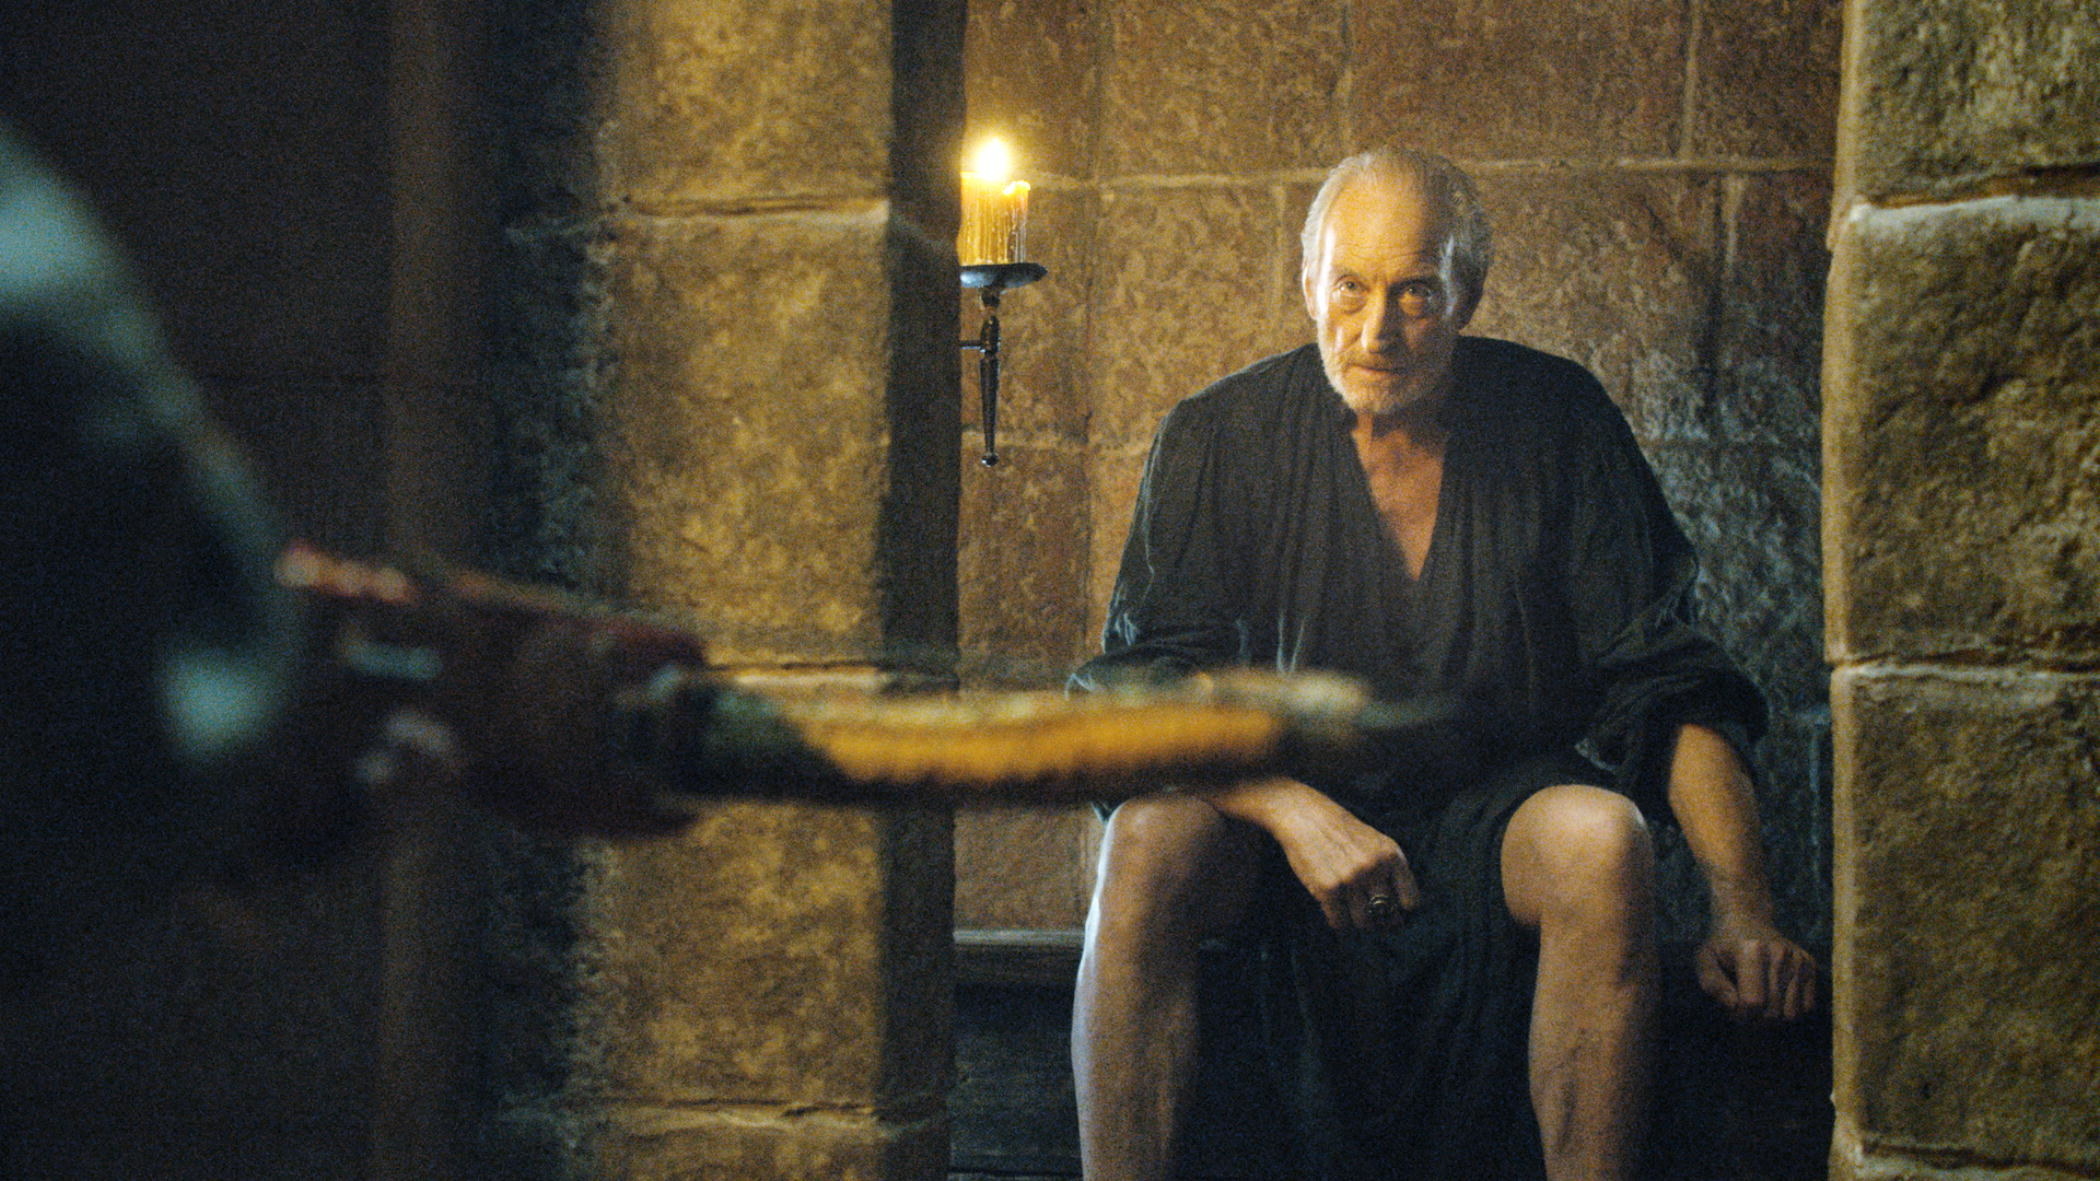 Charles Dance as Tywin Lannister sitting on the toilet with a crossbow pointing at him